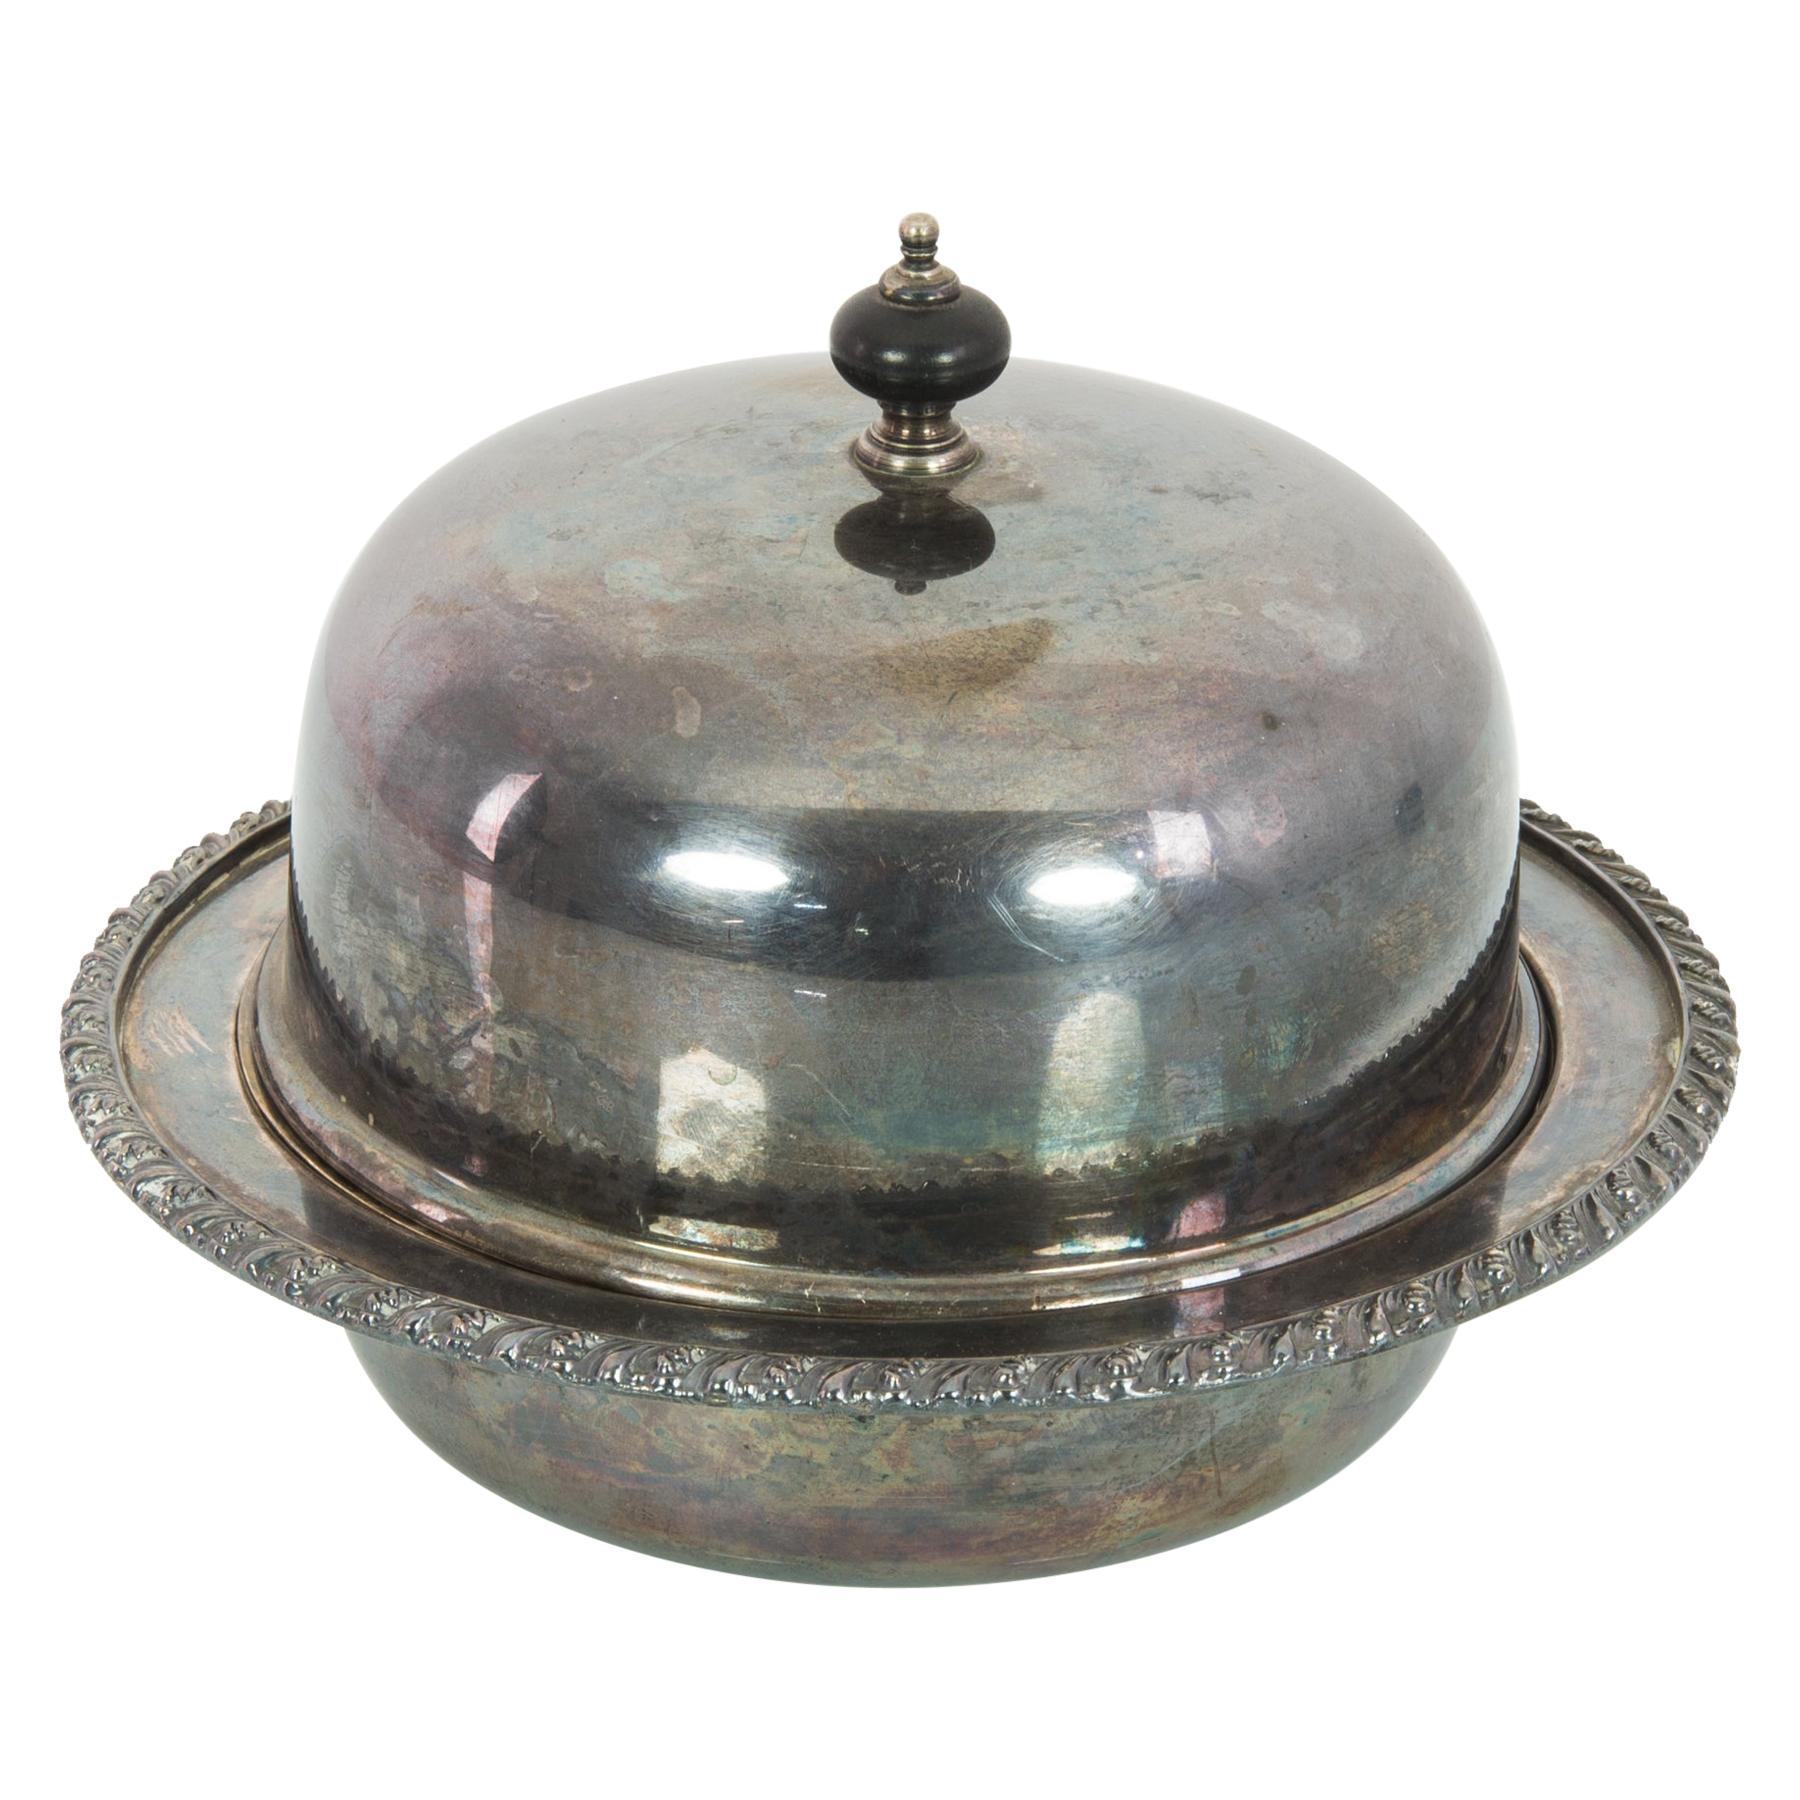 1920s European Silver-Plated Serving Bowl with Lid